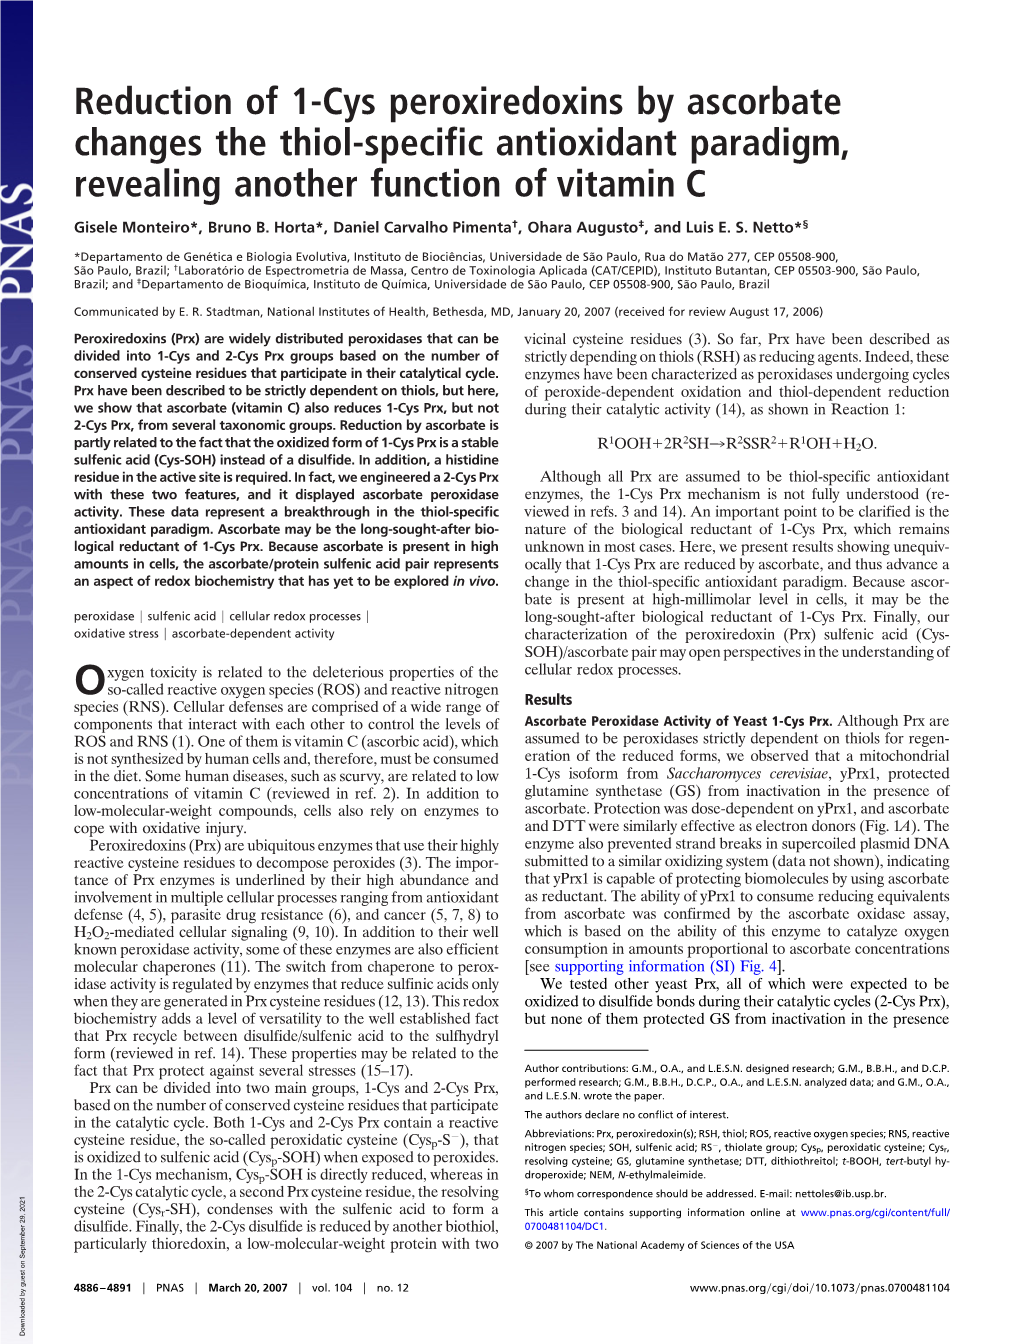 Reduction of 1-Cys Peroxiredoxins by Ascorbate Changes the Thiol-Specific Antioxidant Paradigm, Revealing Another Function of Vitamin C